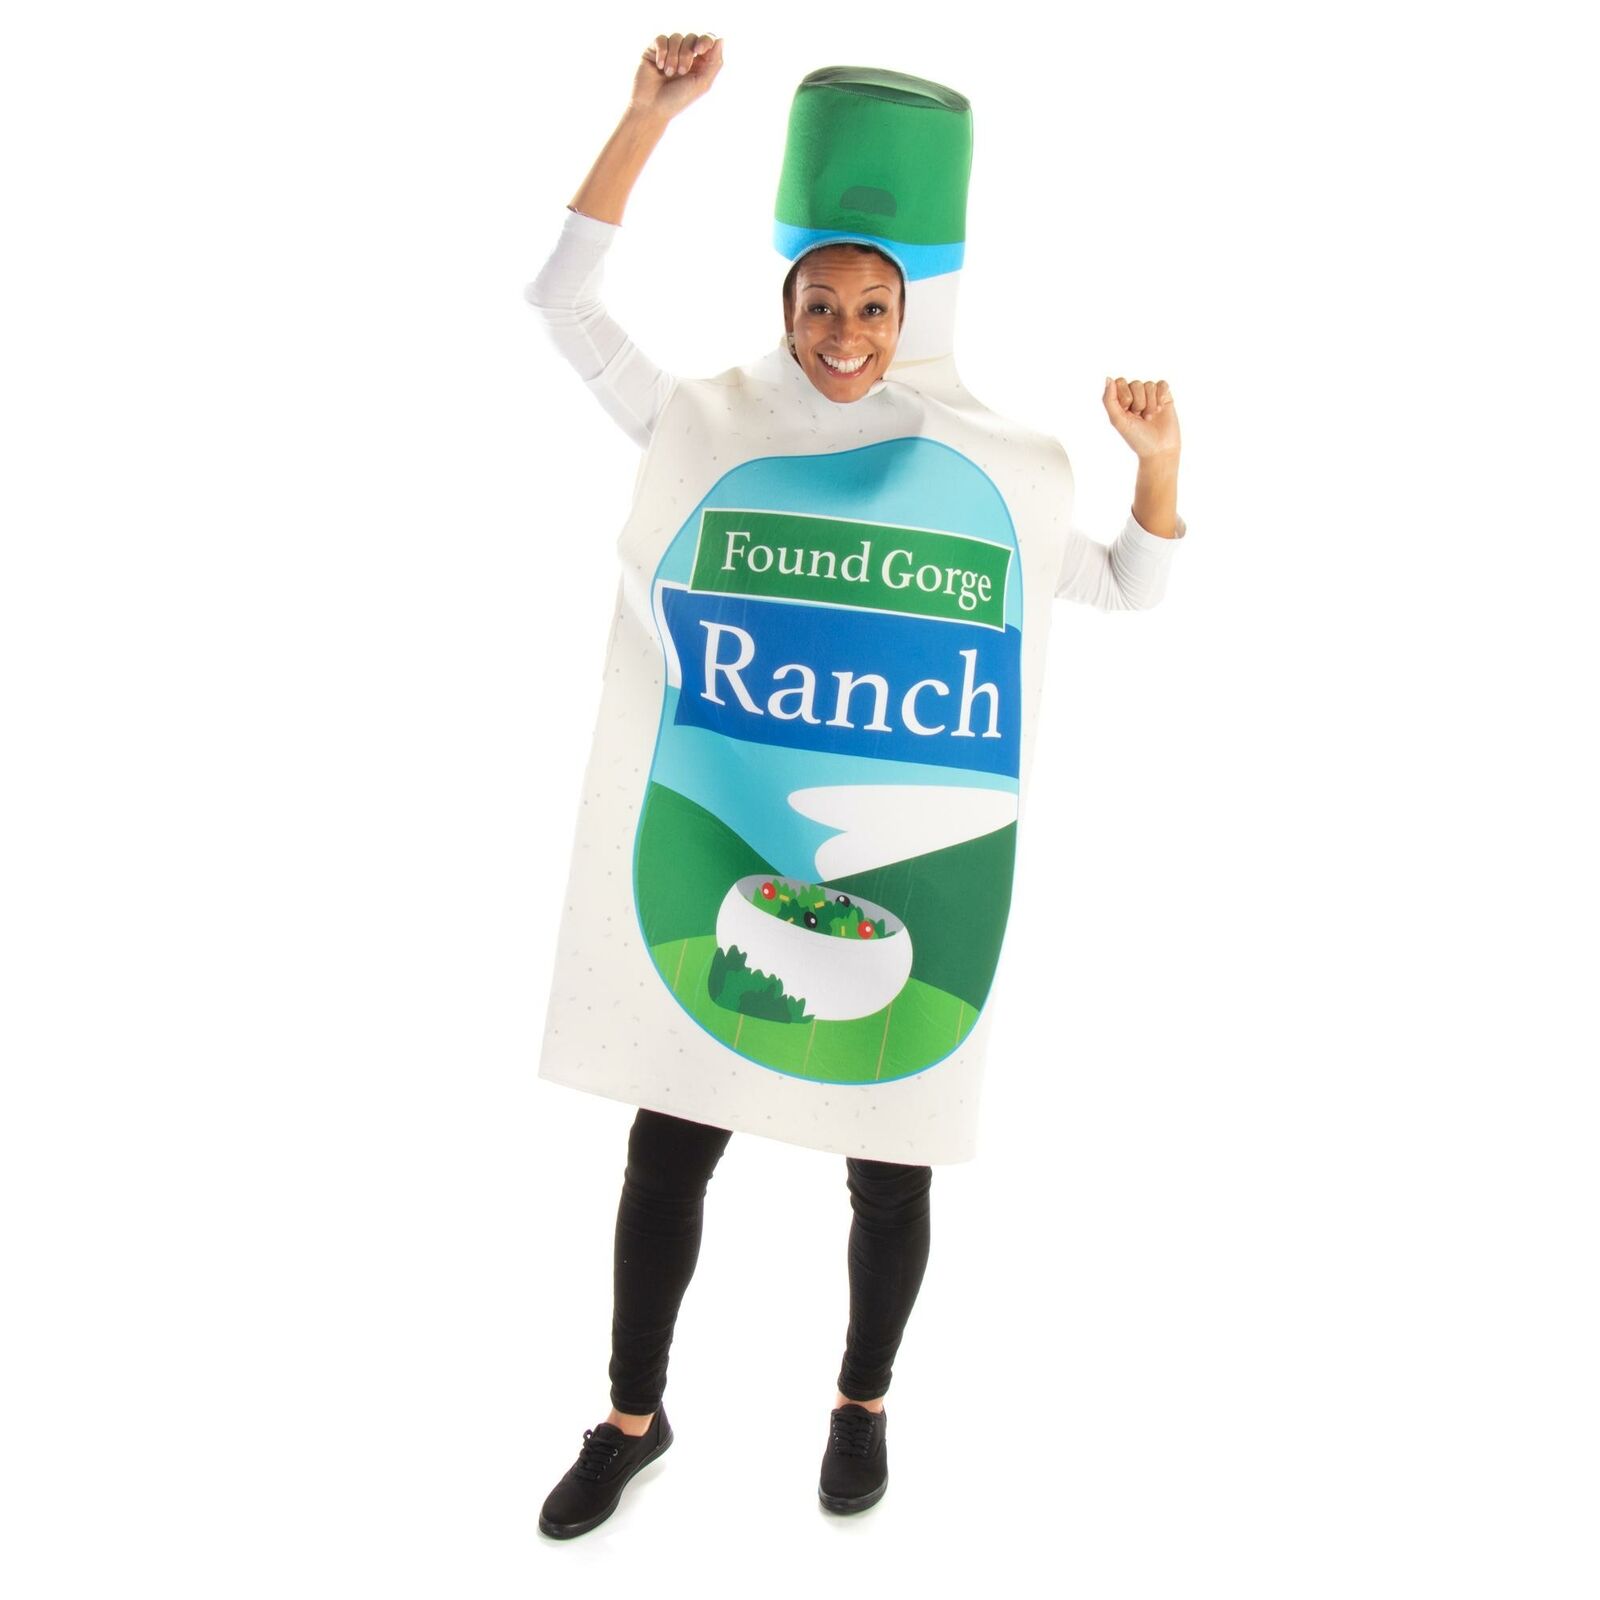 Woman dressed as a bottle of ranch dressing, The label on the dressing is blue, green and white and says "Found Gorge Ranch"